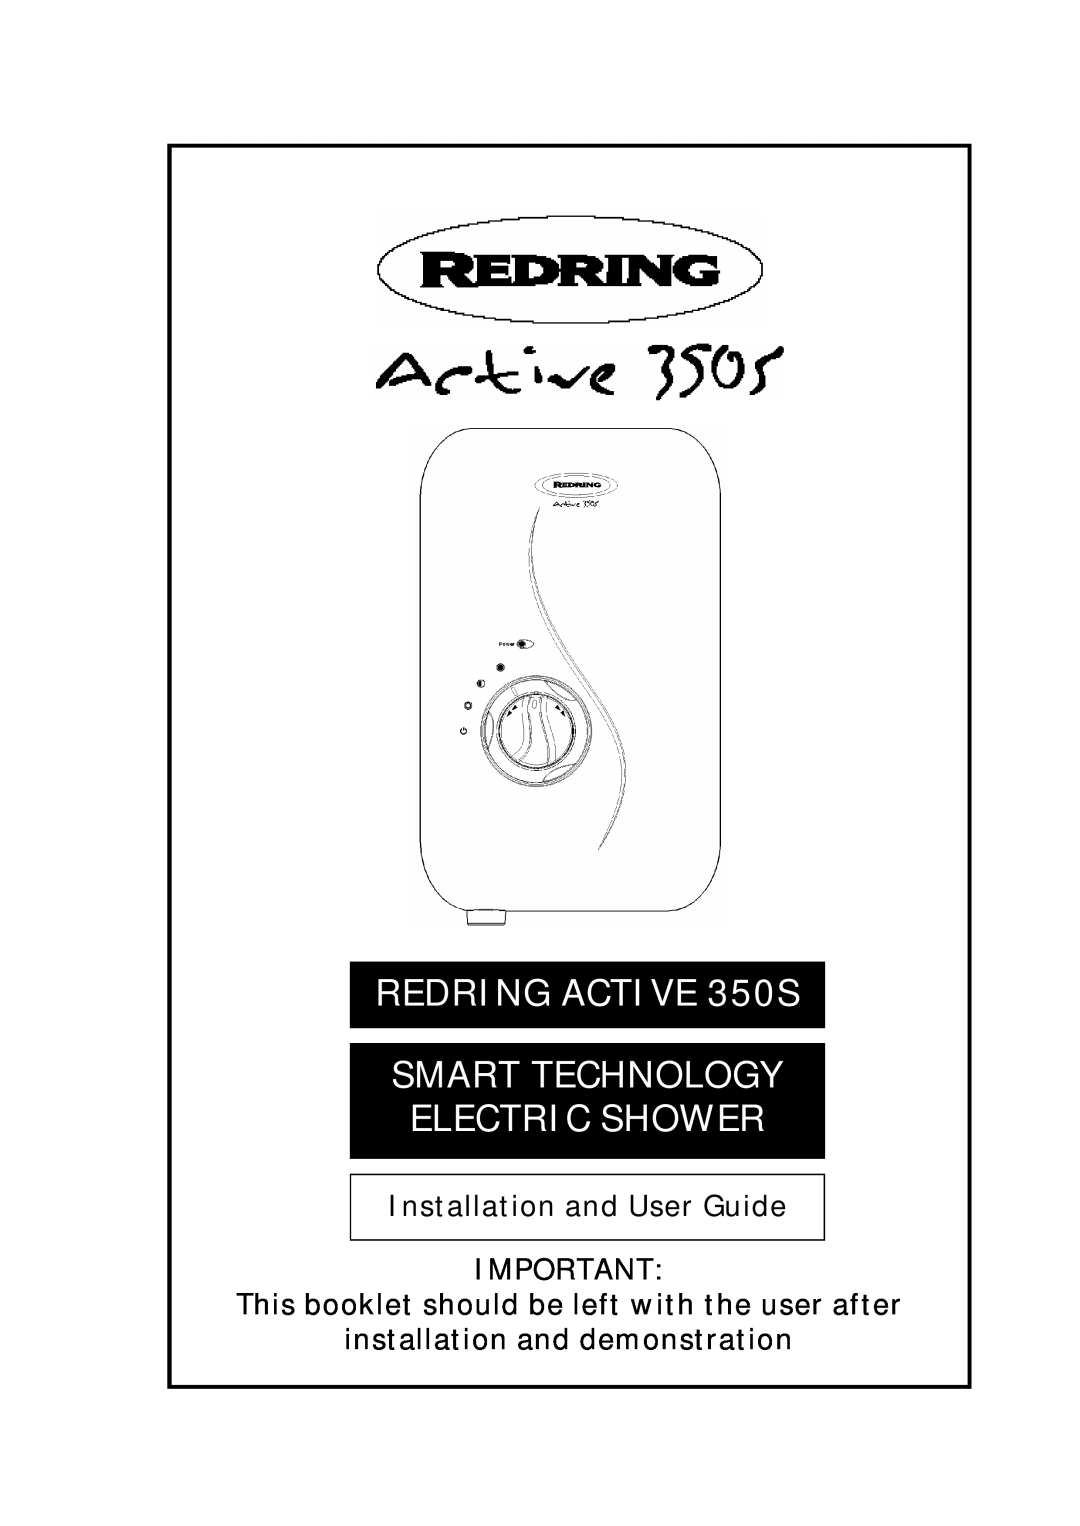 Redring manual REDRING ACTIVE 350S SMART TECHNOLOGY, Electric Shower, Installation and User Guide 